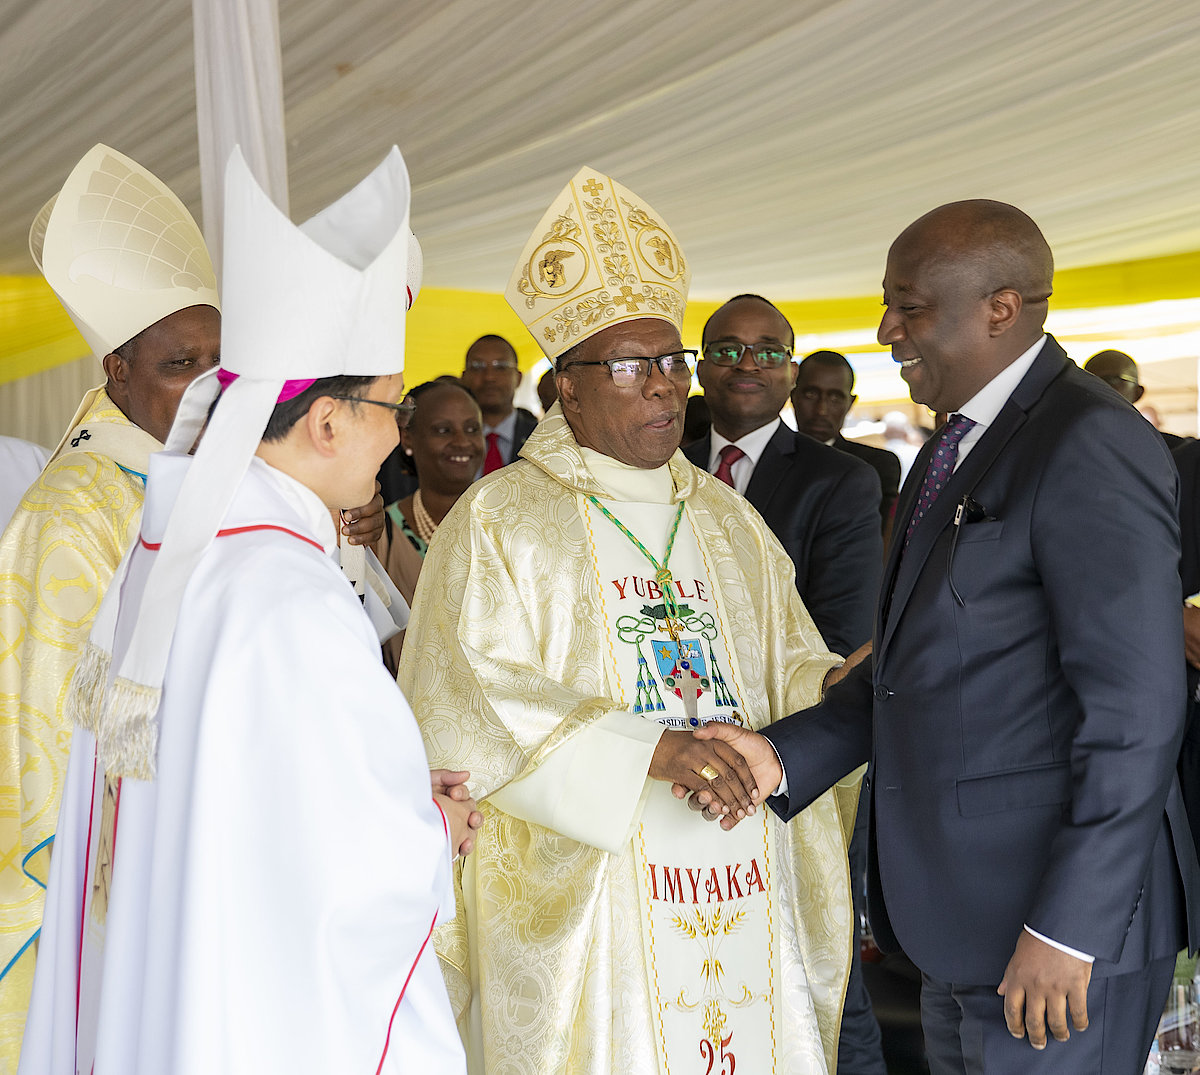 PRIME MINISTER ATTENDED THE SILVER JUBILEE OF EPISCOPAL ORDINATION OF MONSIGNOR PHILIPPE RUKAMBA